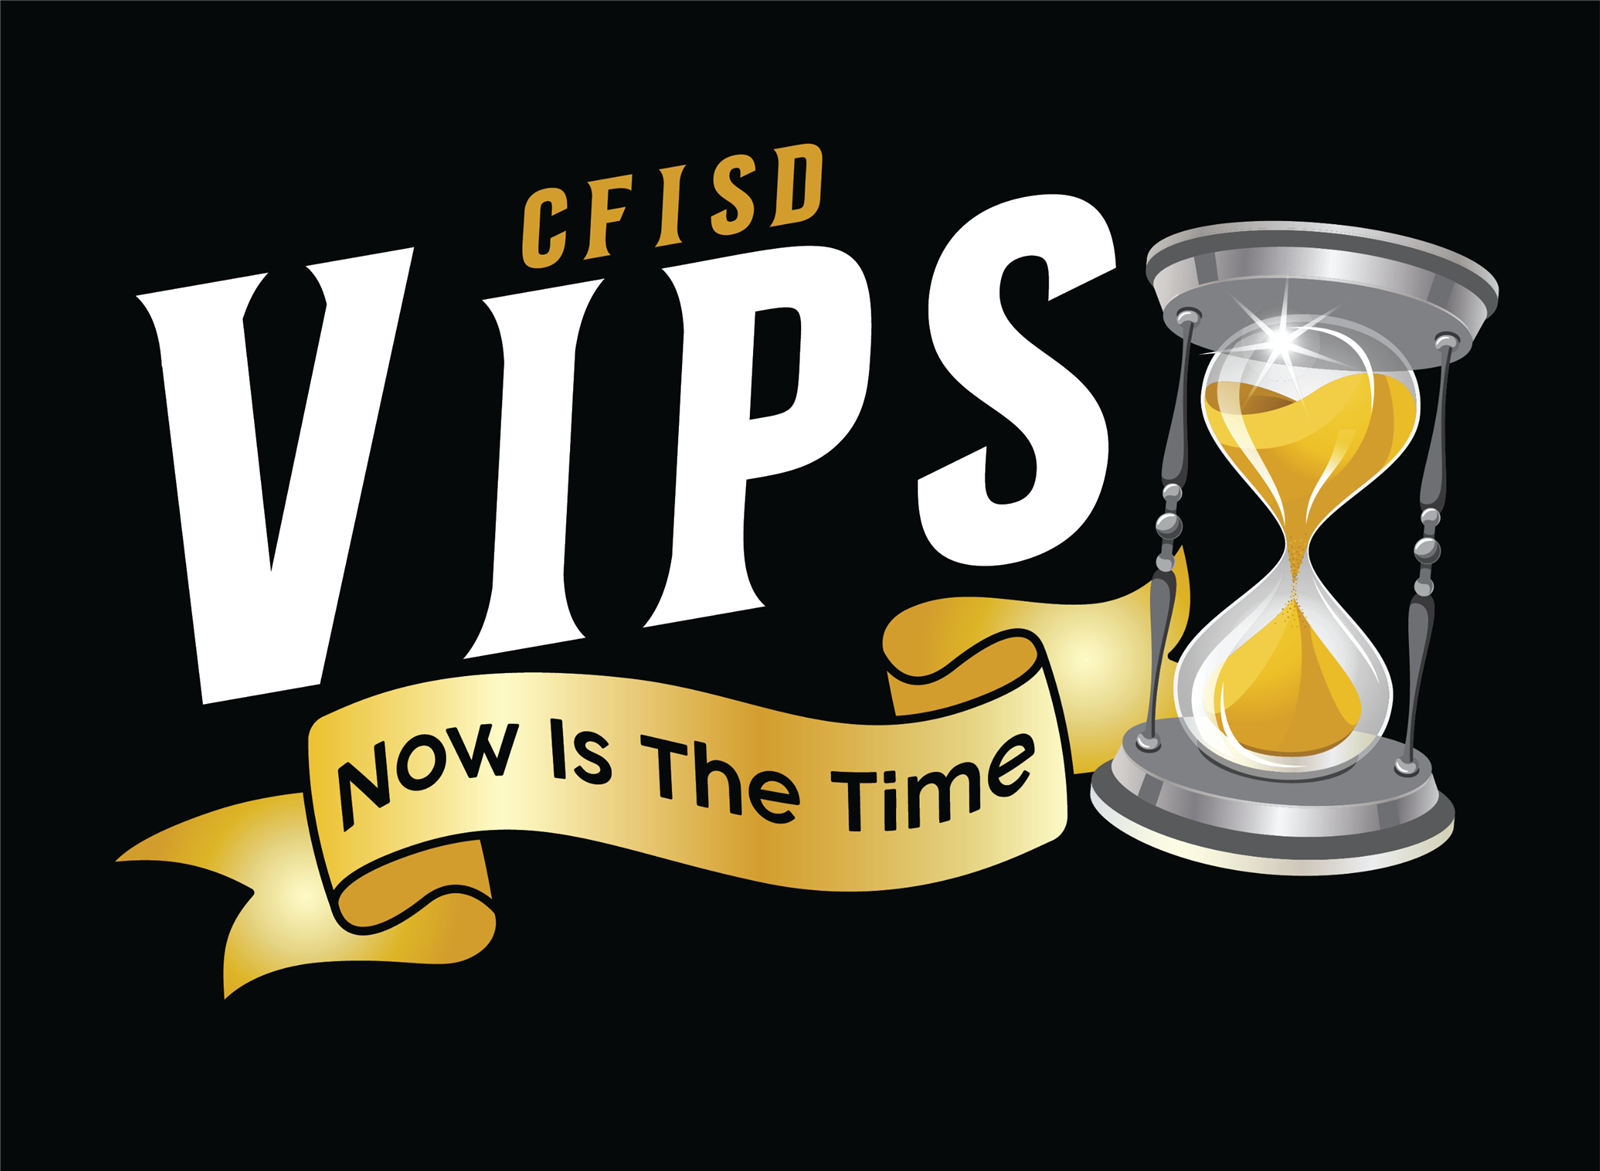 CFISD VIPS now is the time